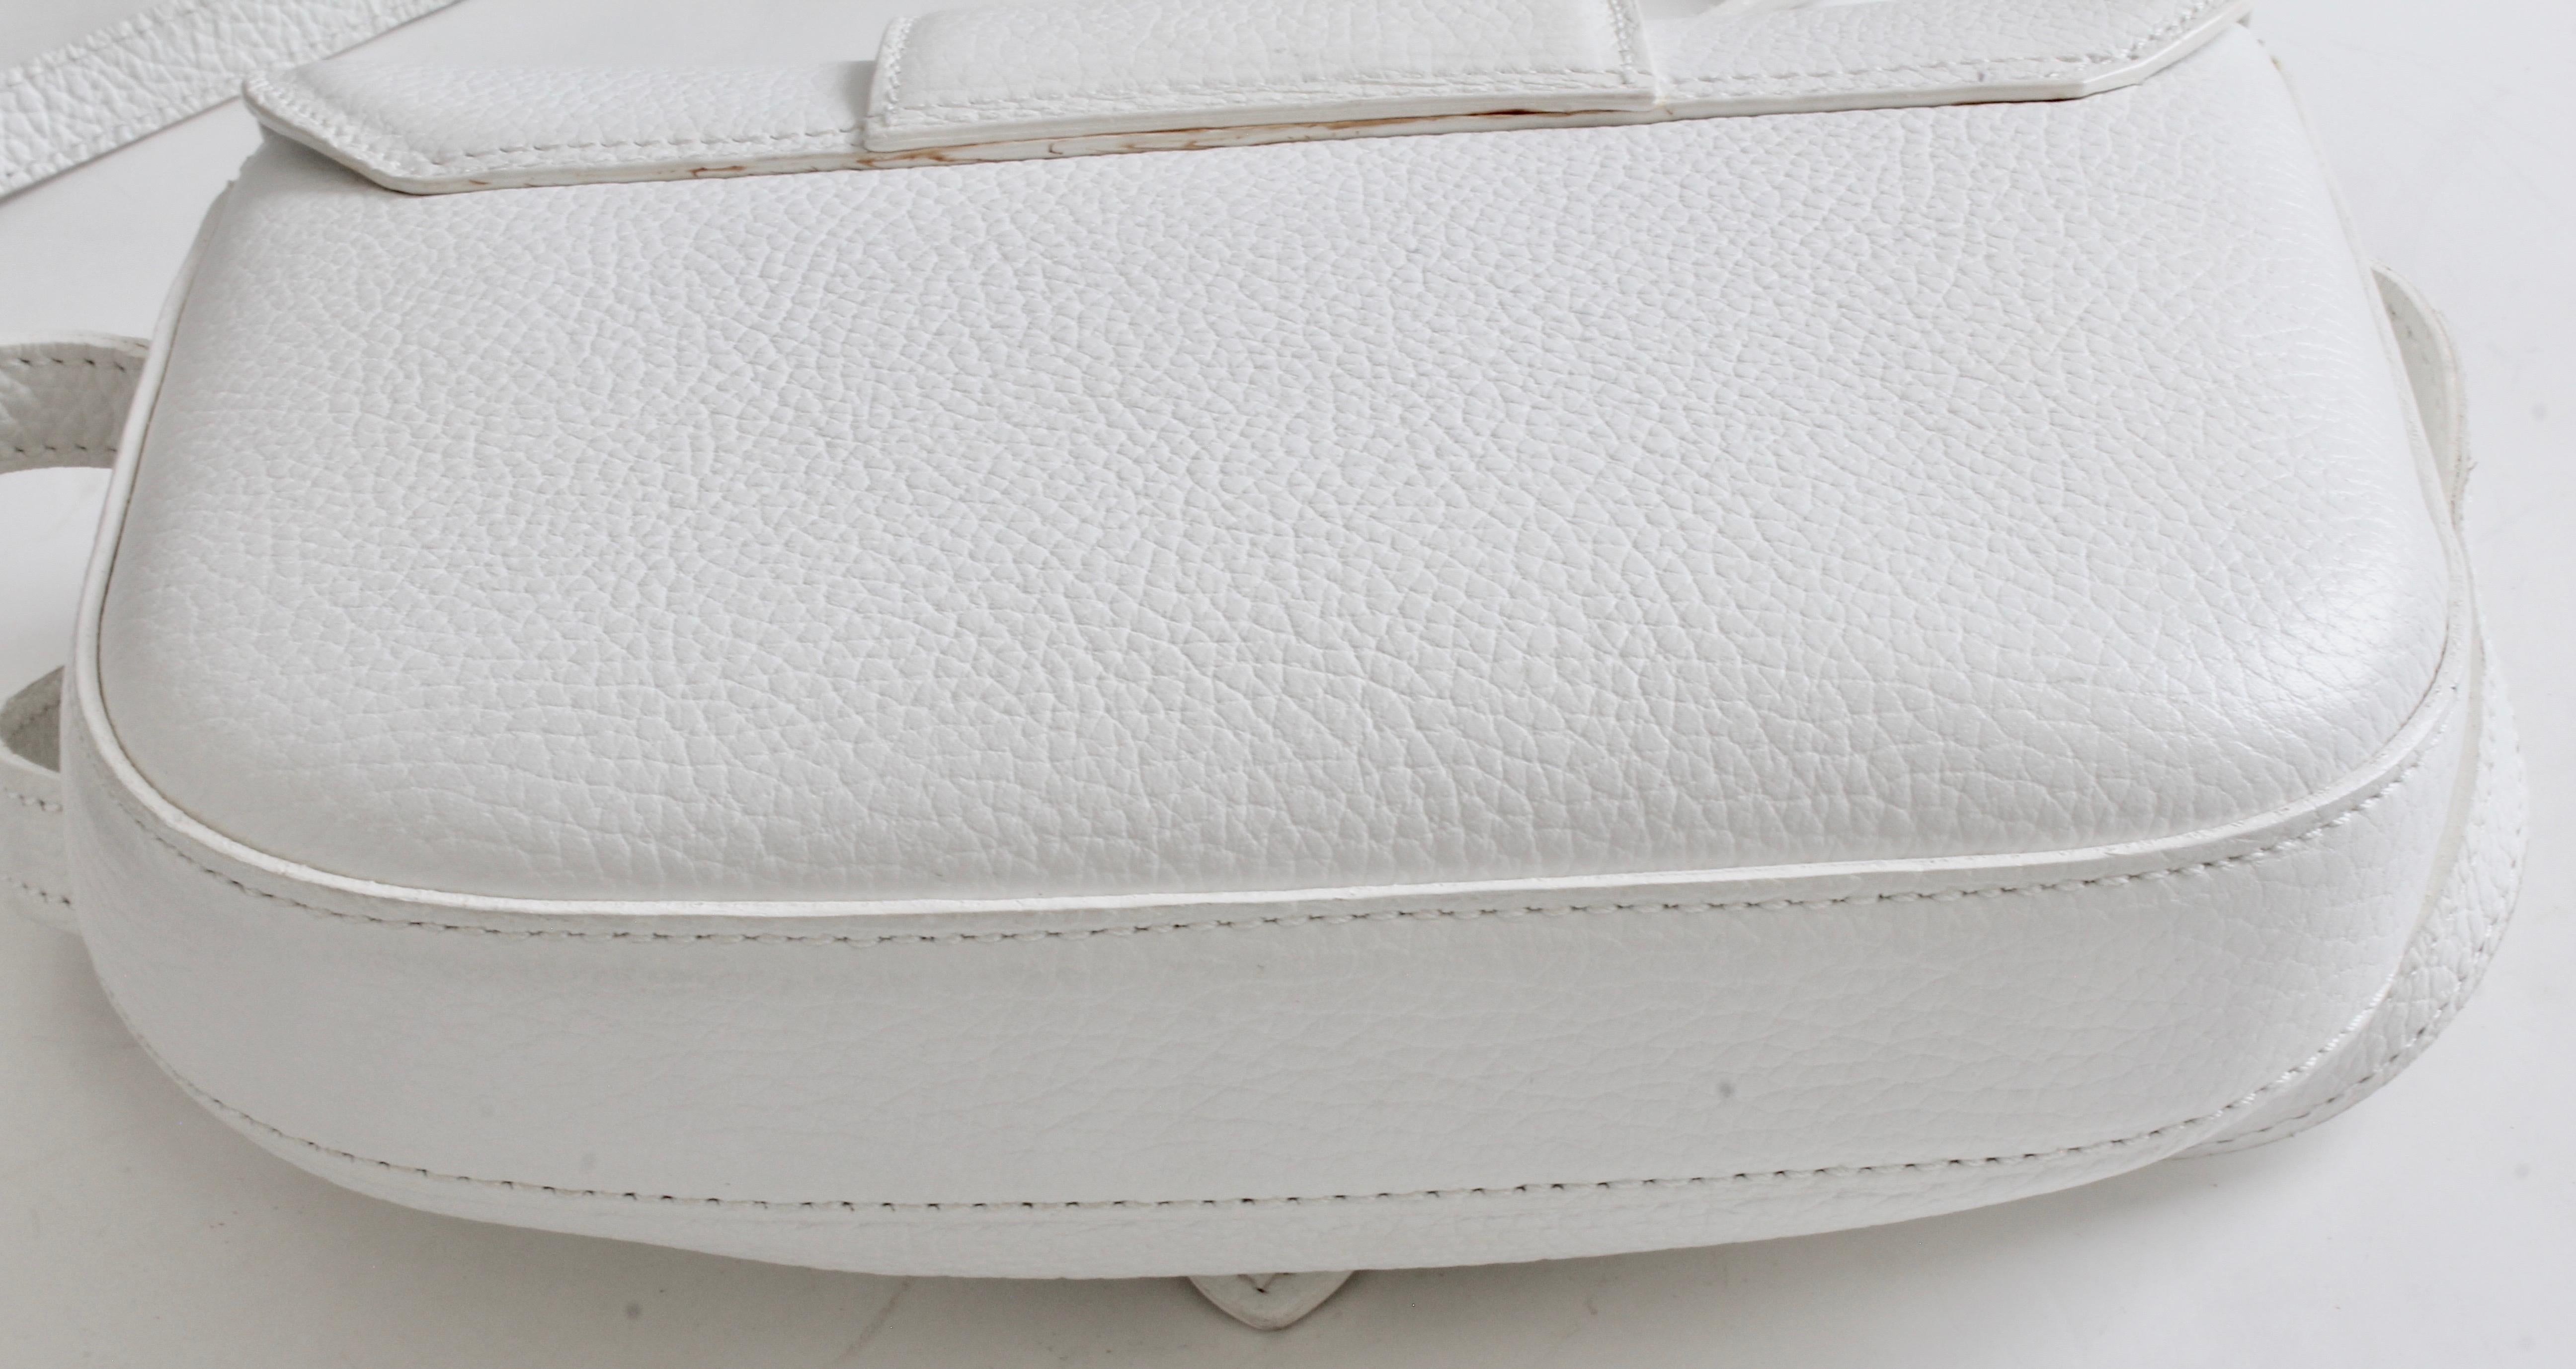 Bally Crossbody Bag White Pebbled Leather Top Flap Shoulder Bag Italy 2